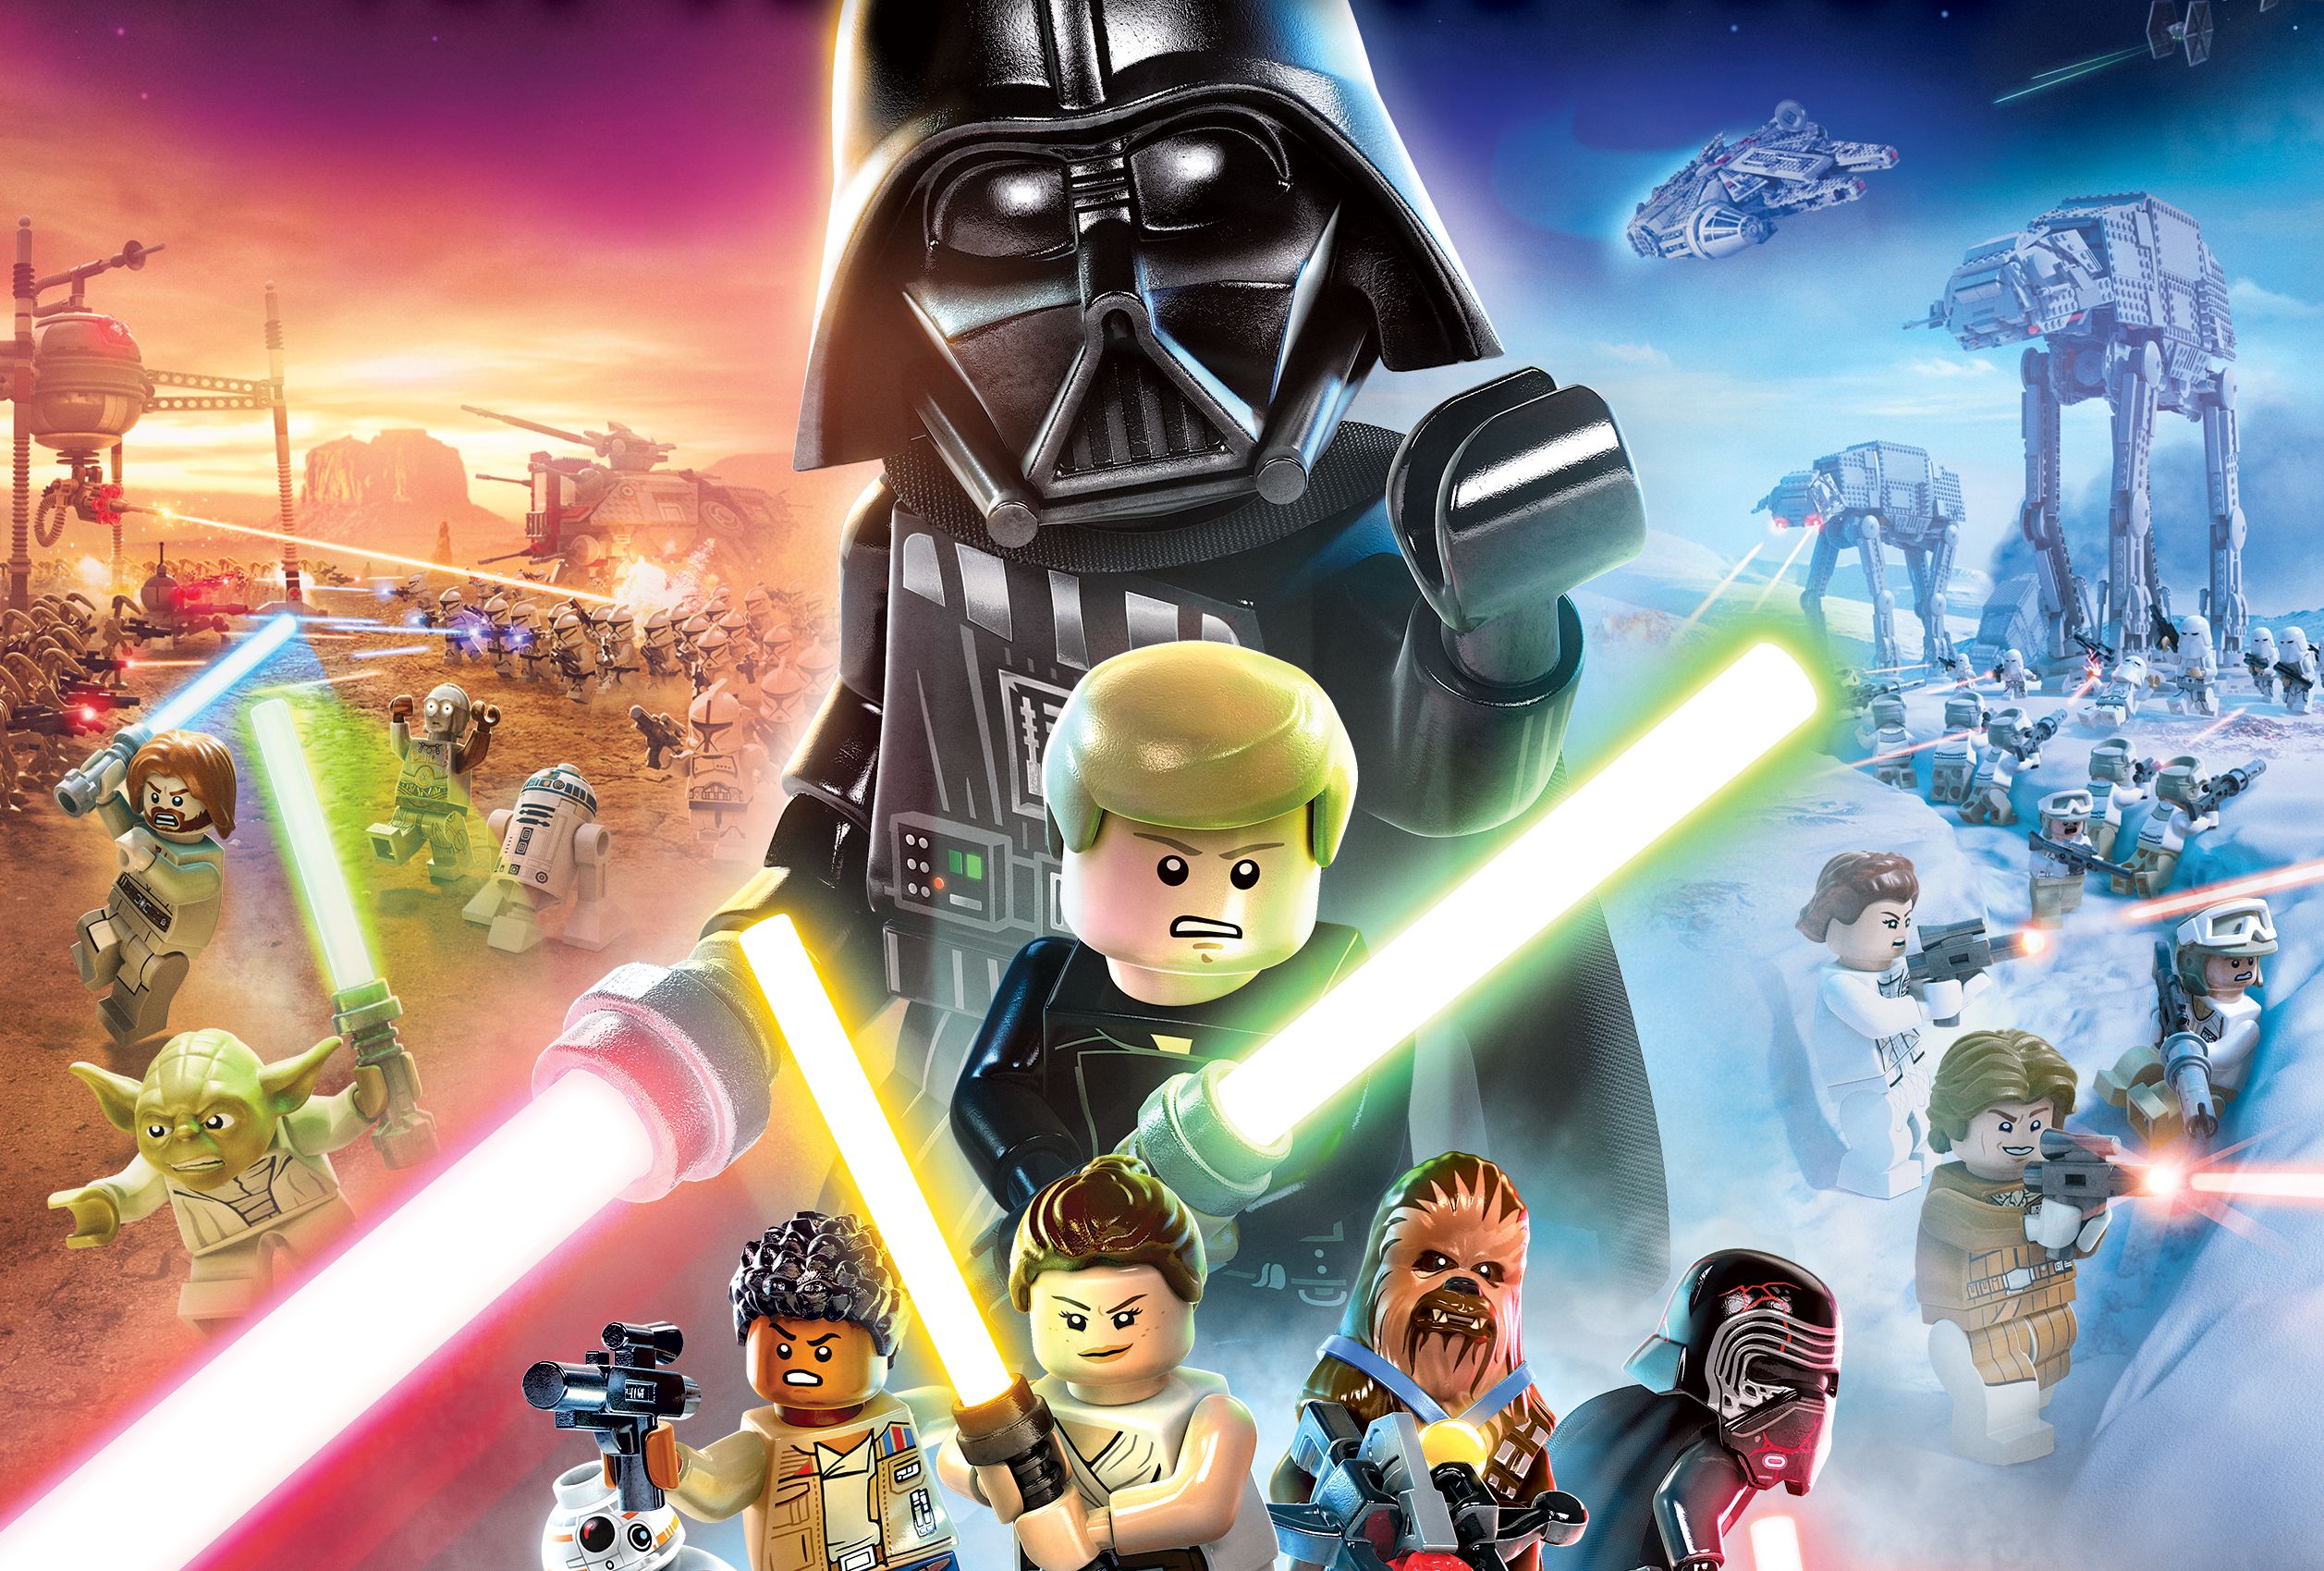 Image for LEGO Star Wars: The Skywalker Saga is the biggest launch in LEGO game history with 3.2 million sold